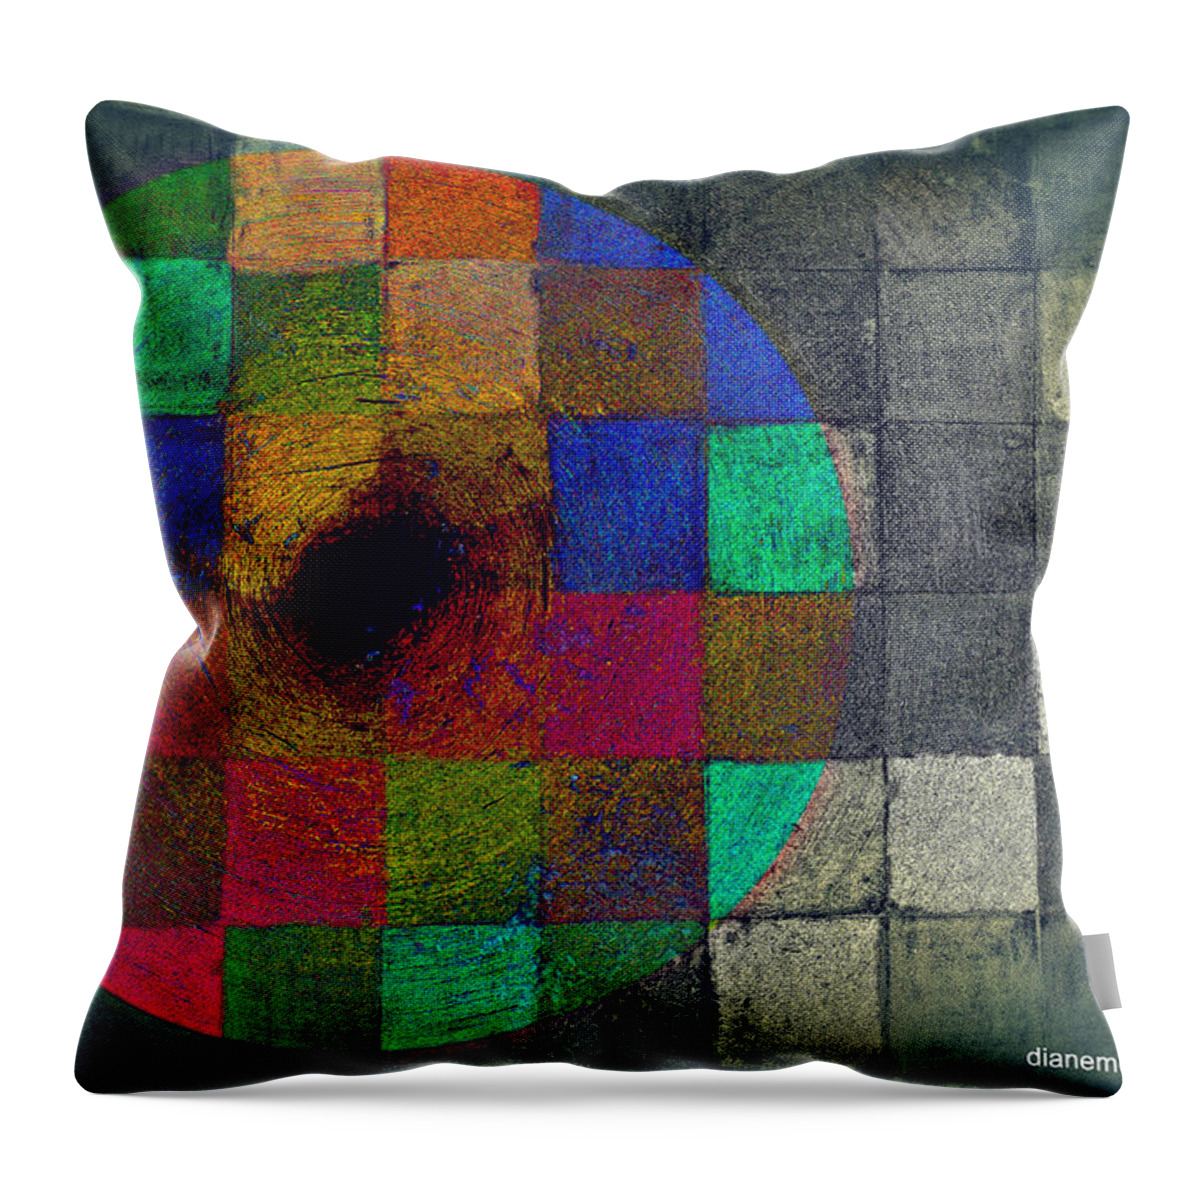 Abstract Throw Pillow featuring the photograph Their Latest Album by Diane montana Jansson